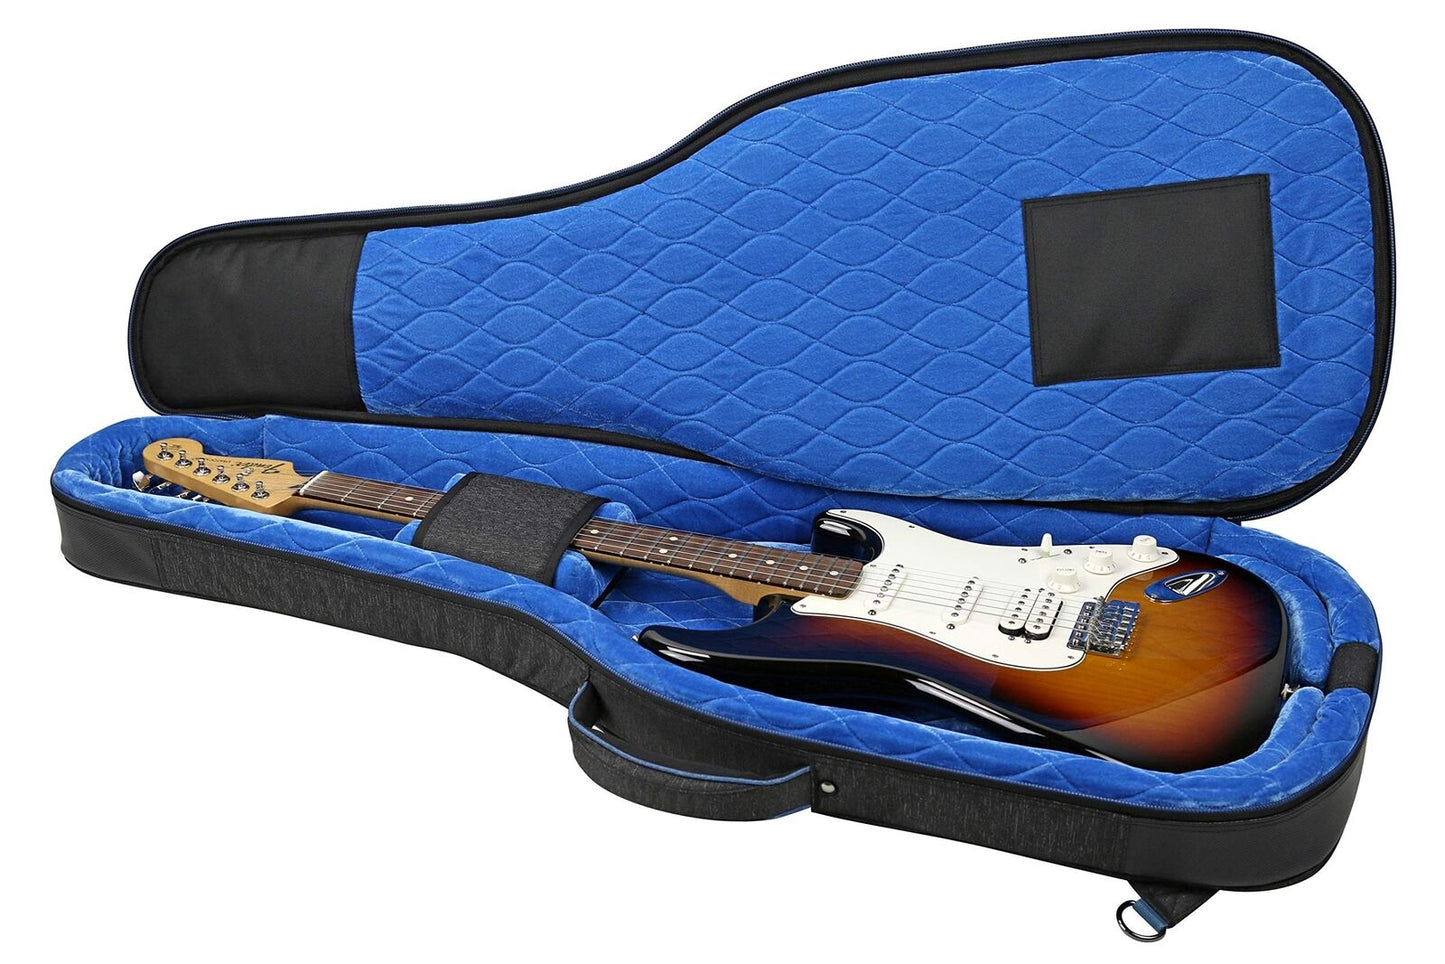 New - Reunion Blues RBCE1 RB Continental Voyager Electric Guitar Case